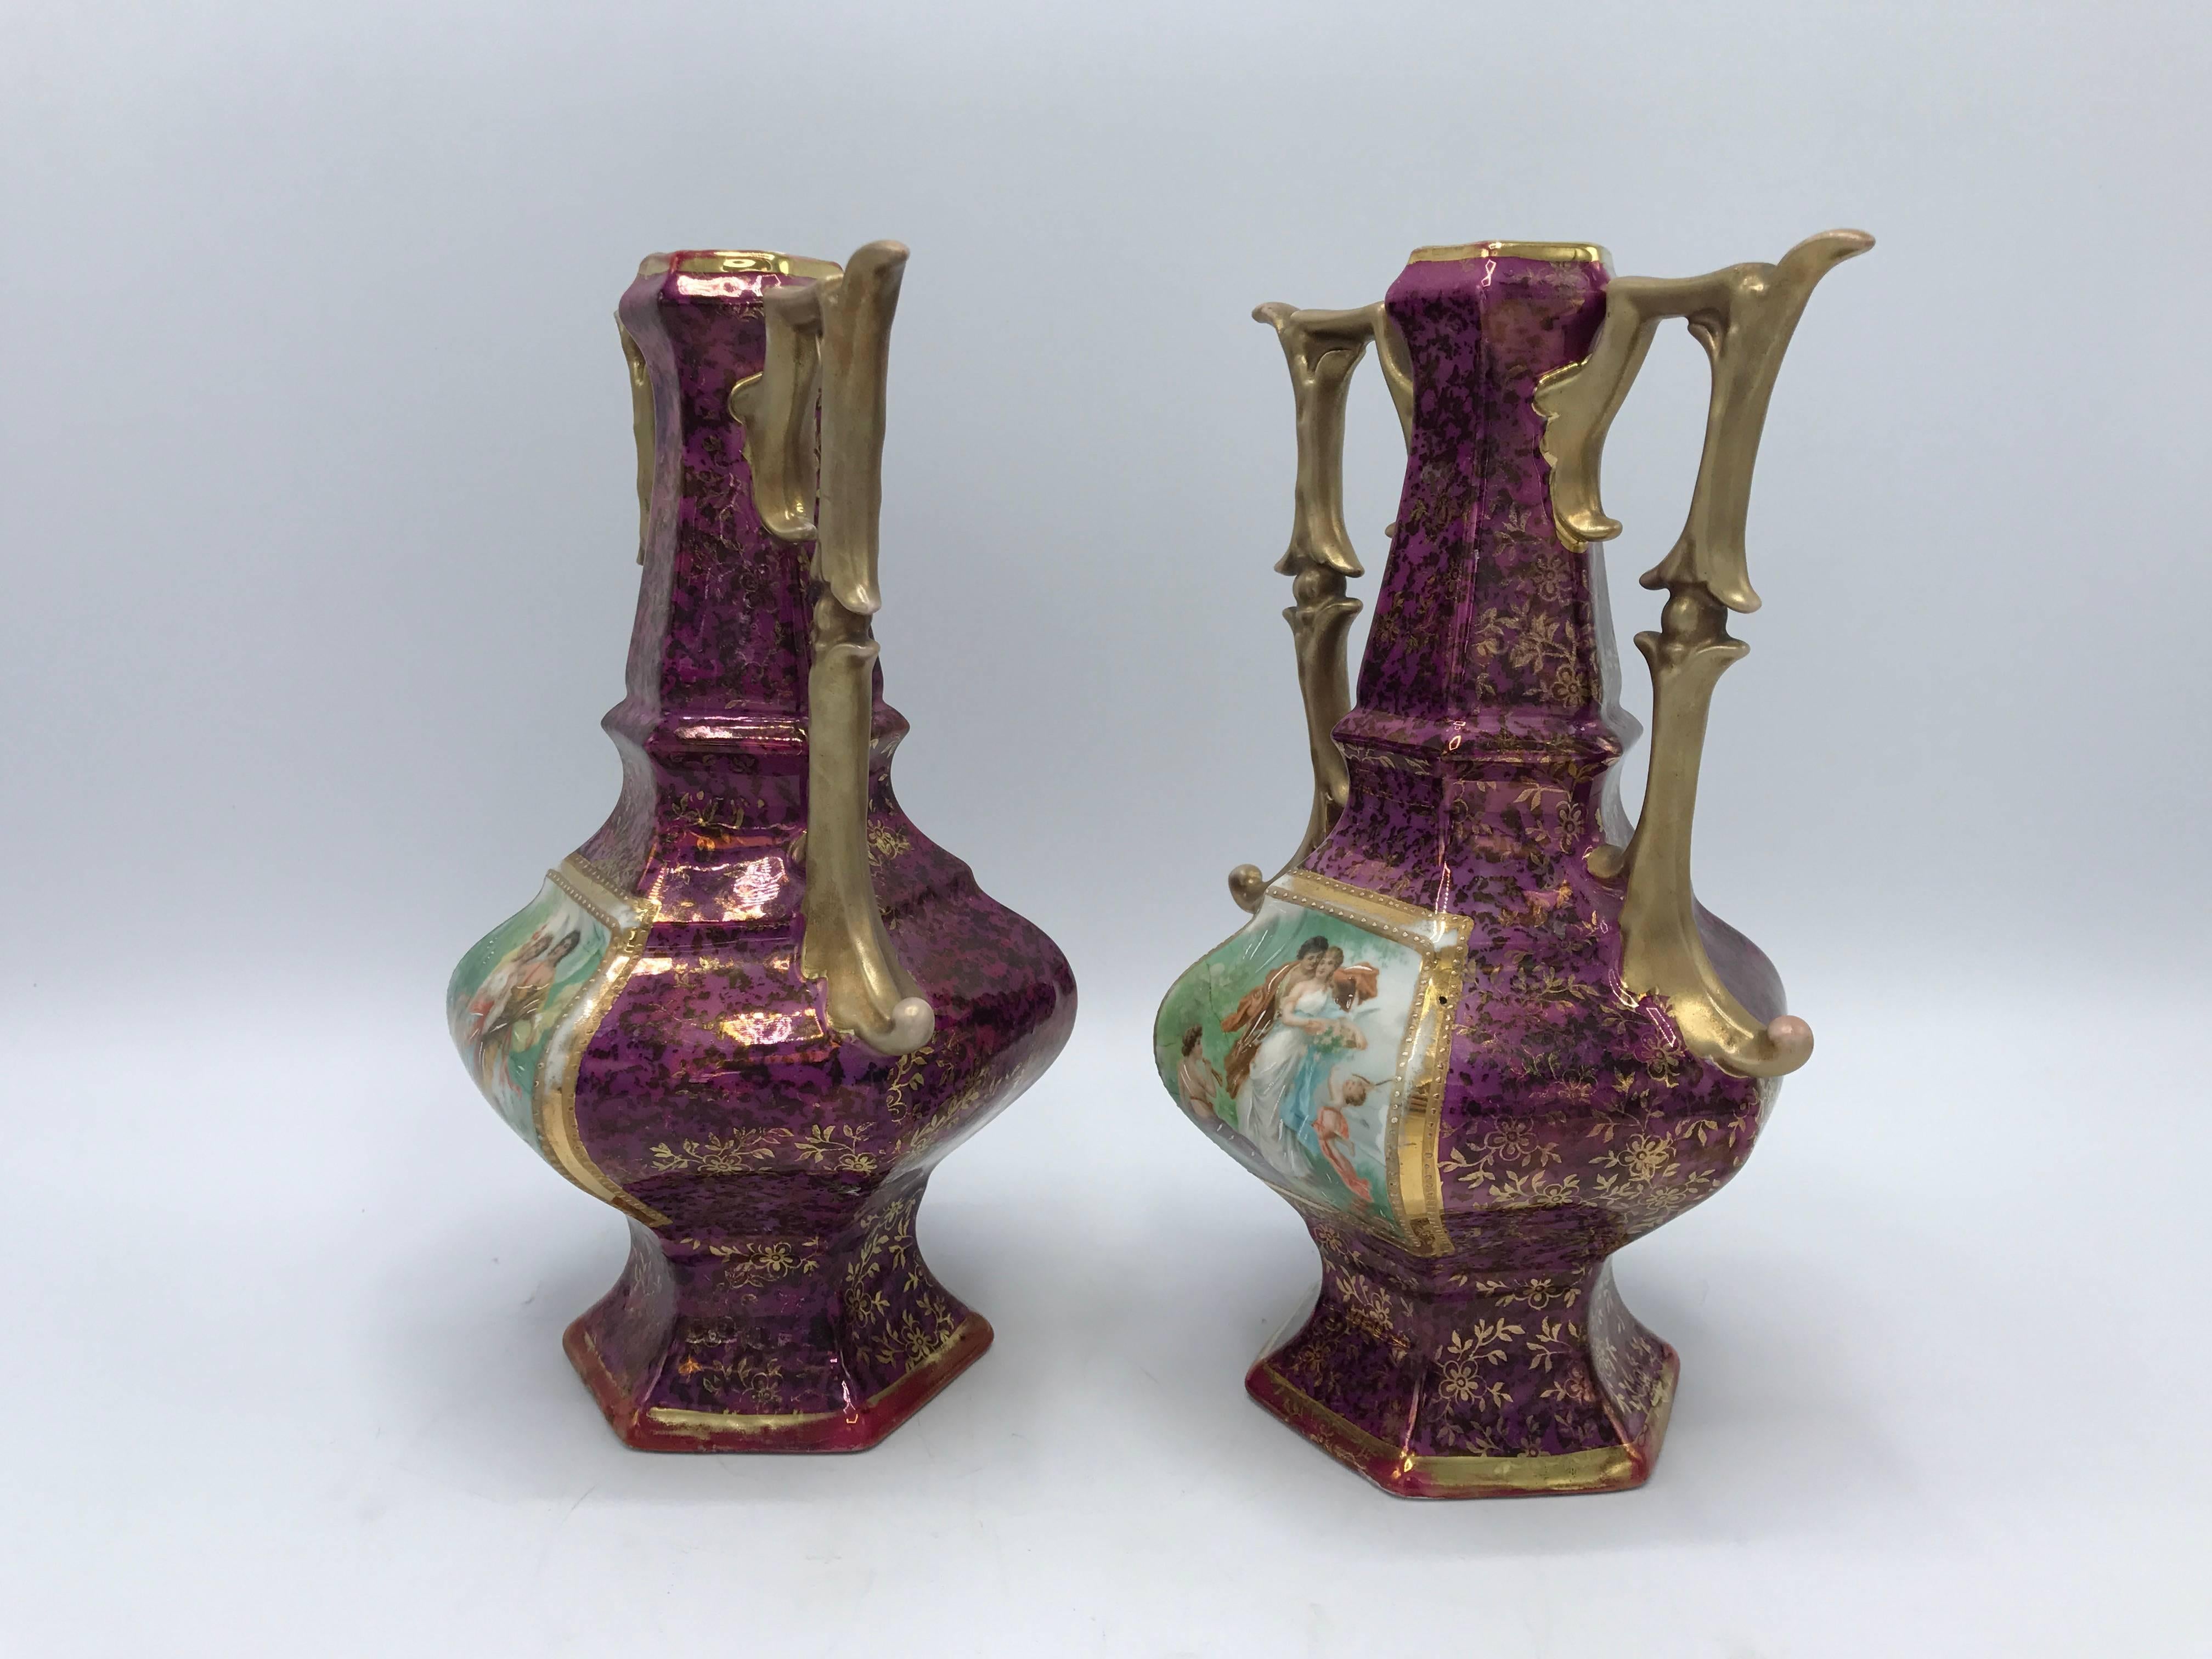 19th Century French Hand-Painted Pink and Gold Vases with Handles, Pair 3